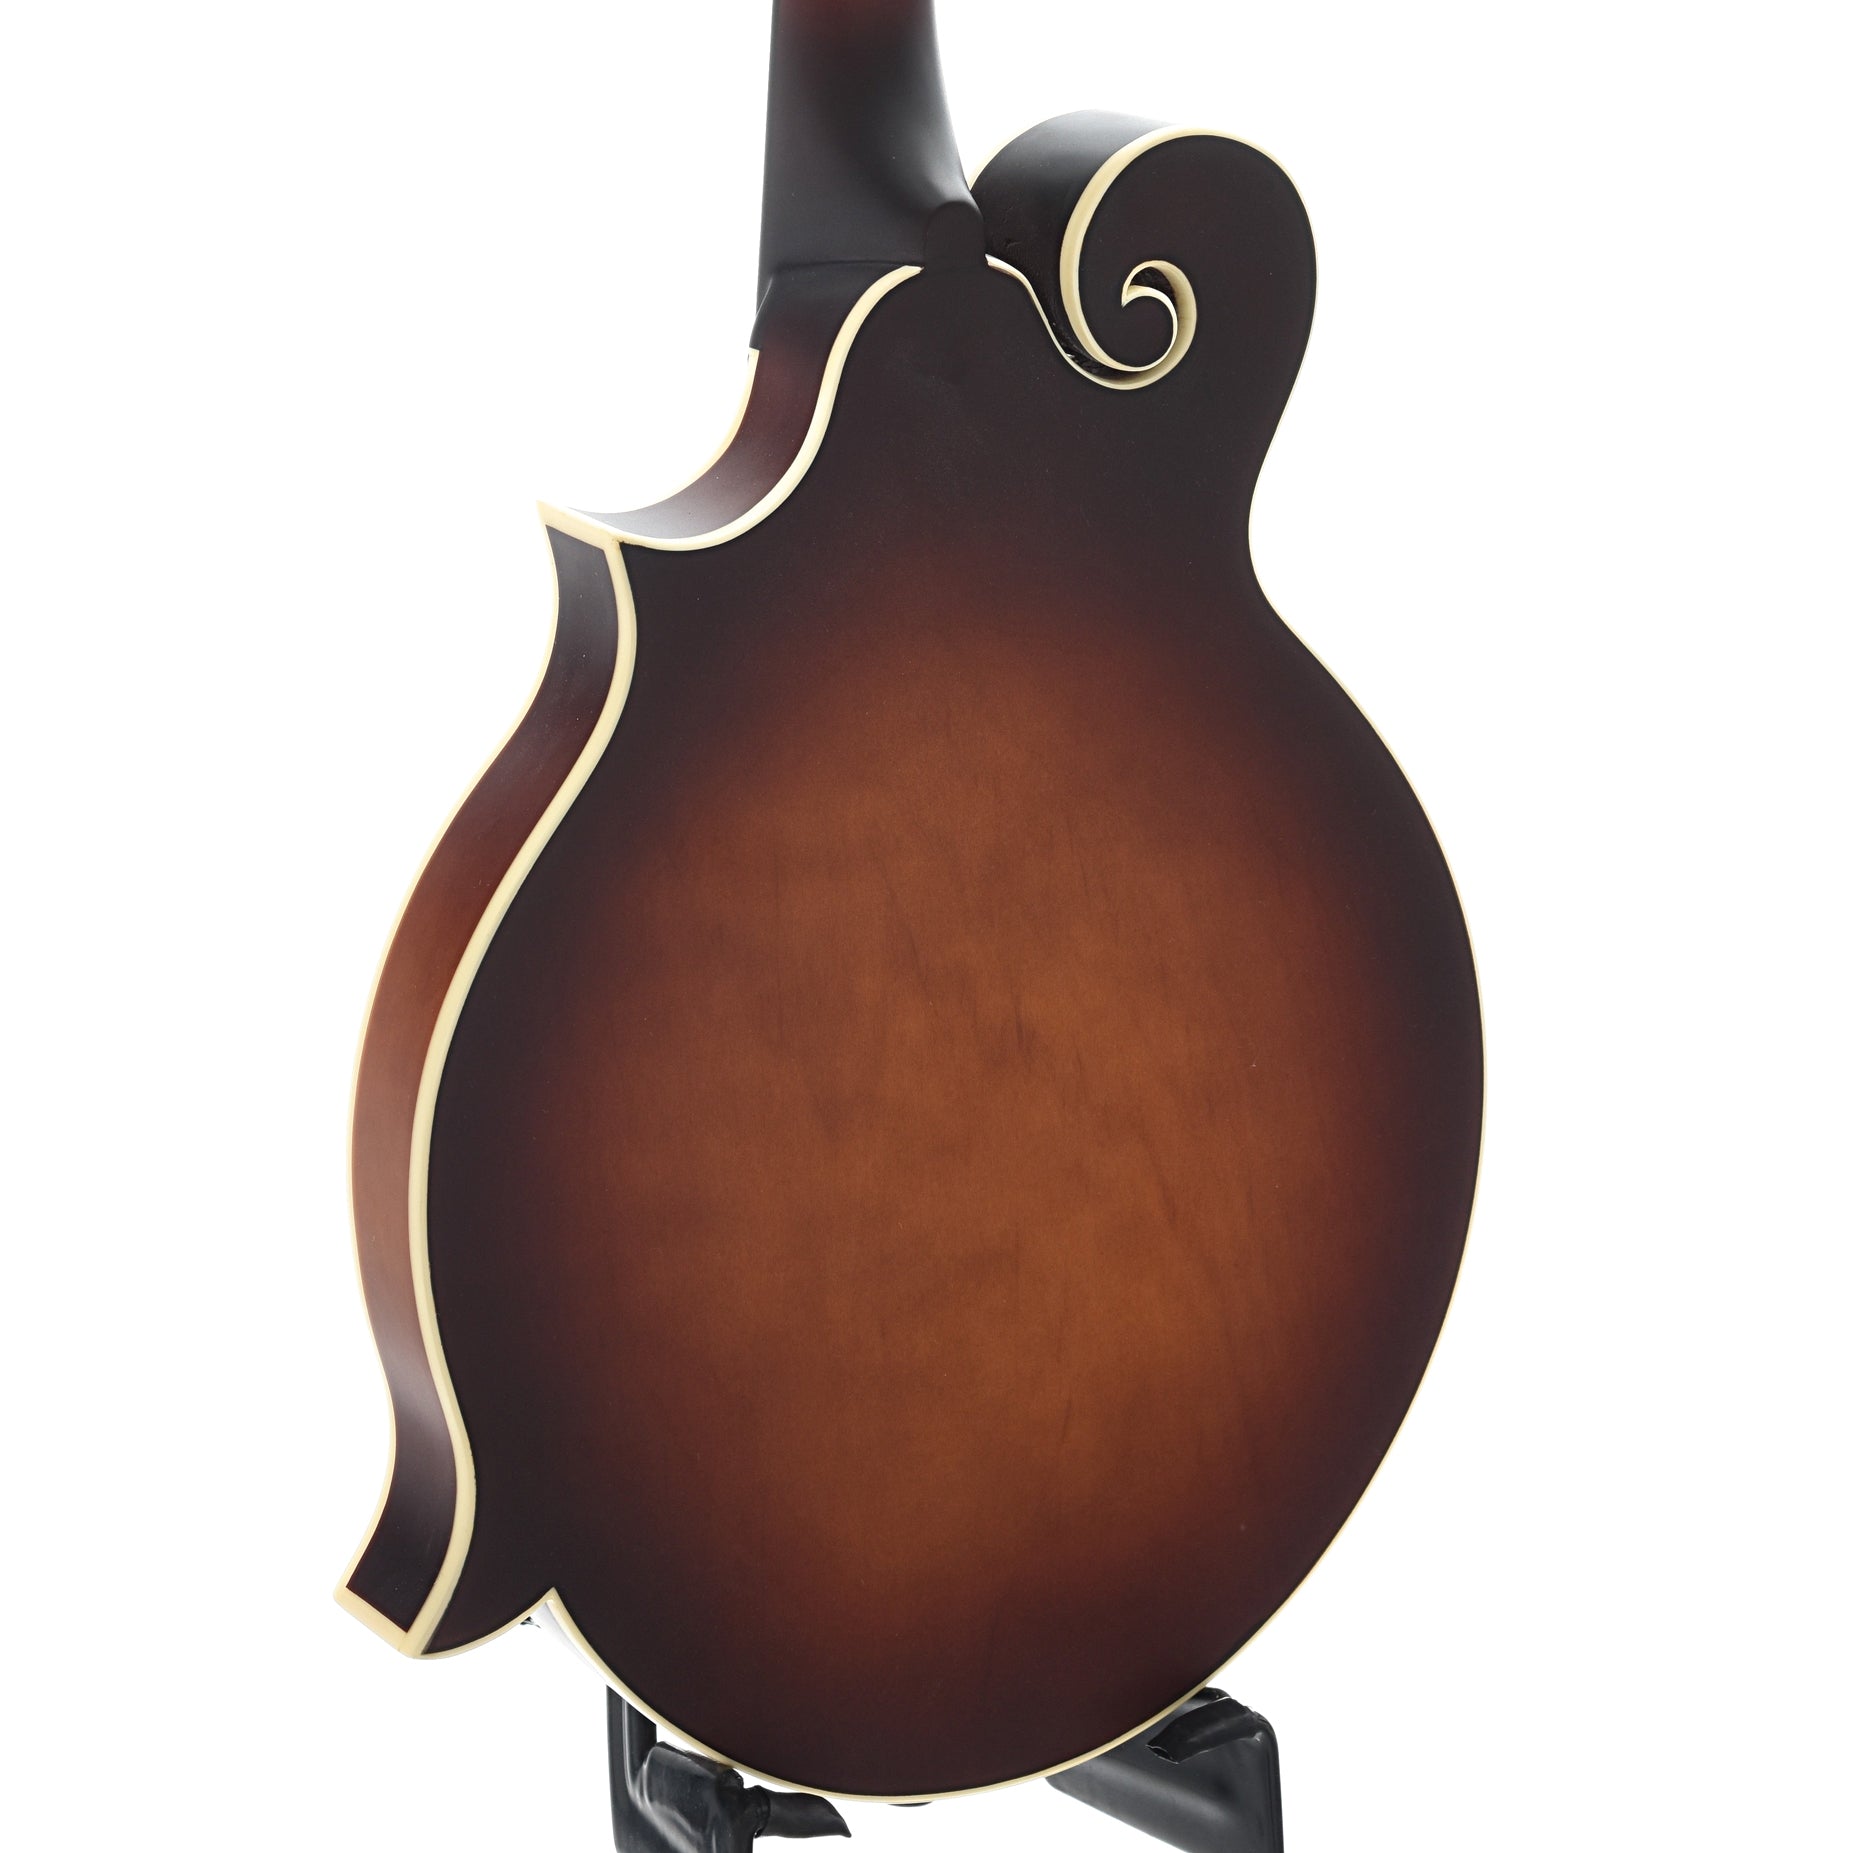 Back and Side of The Loar "Honey Creek" F-Style Mandolin